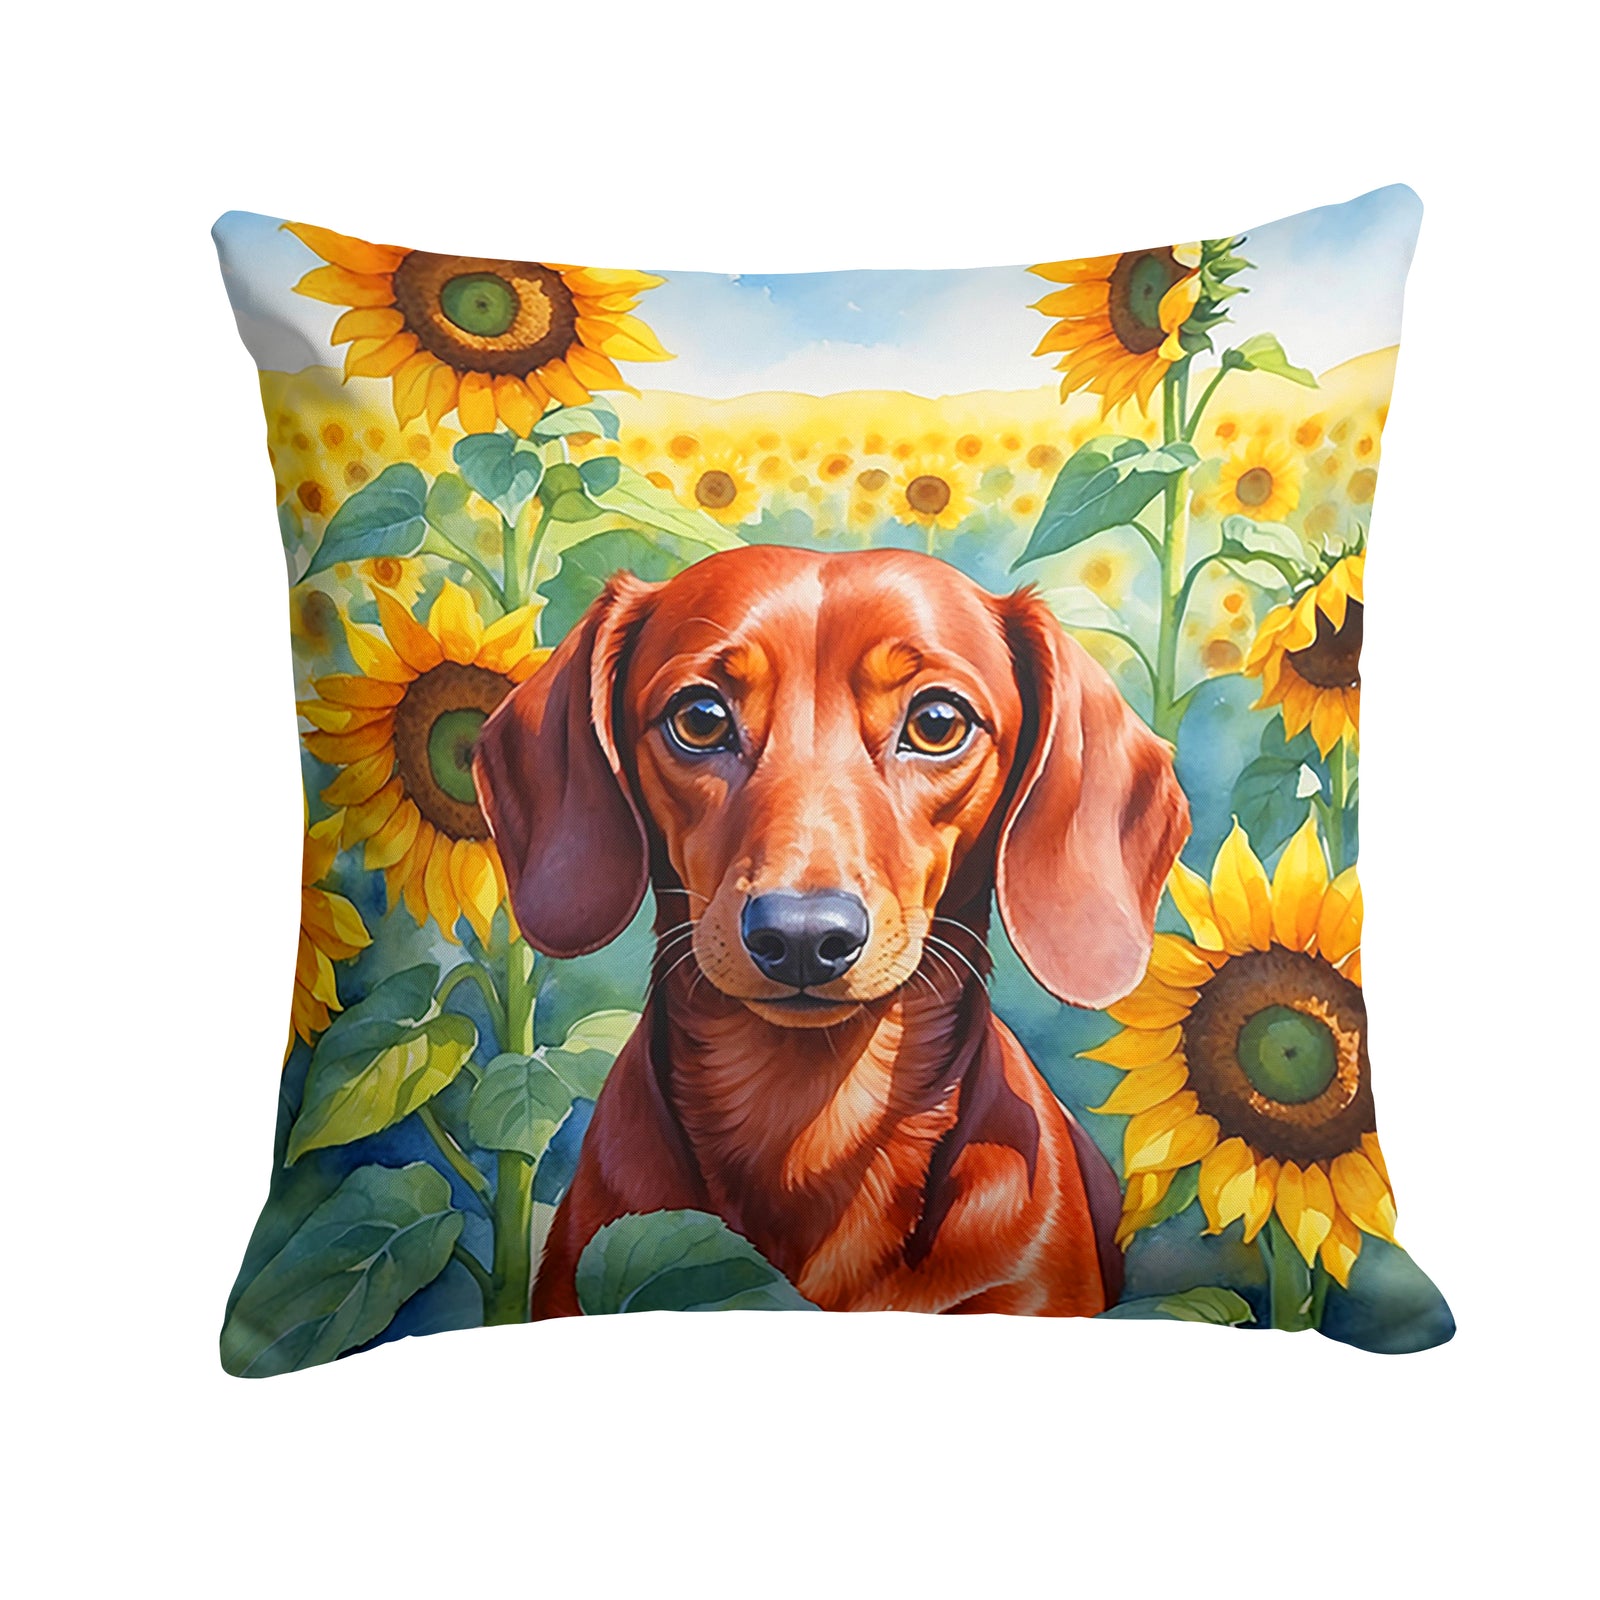 Buy this Dachshund in Sunflowers Throw Pillow